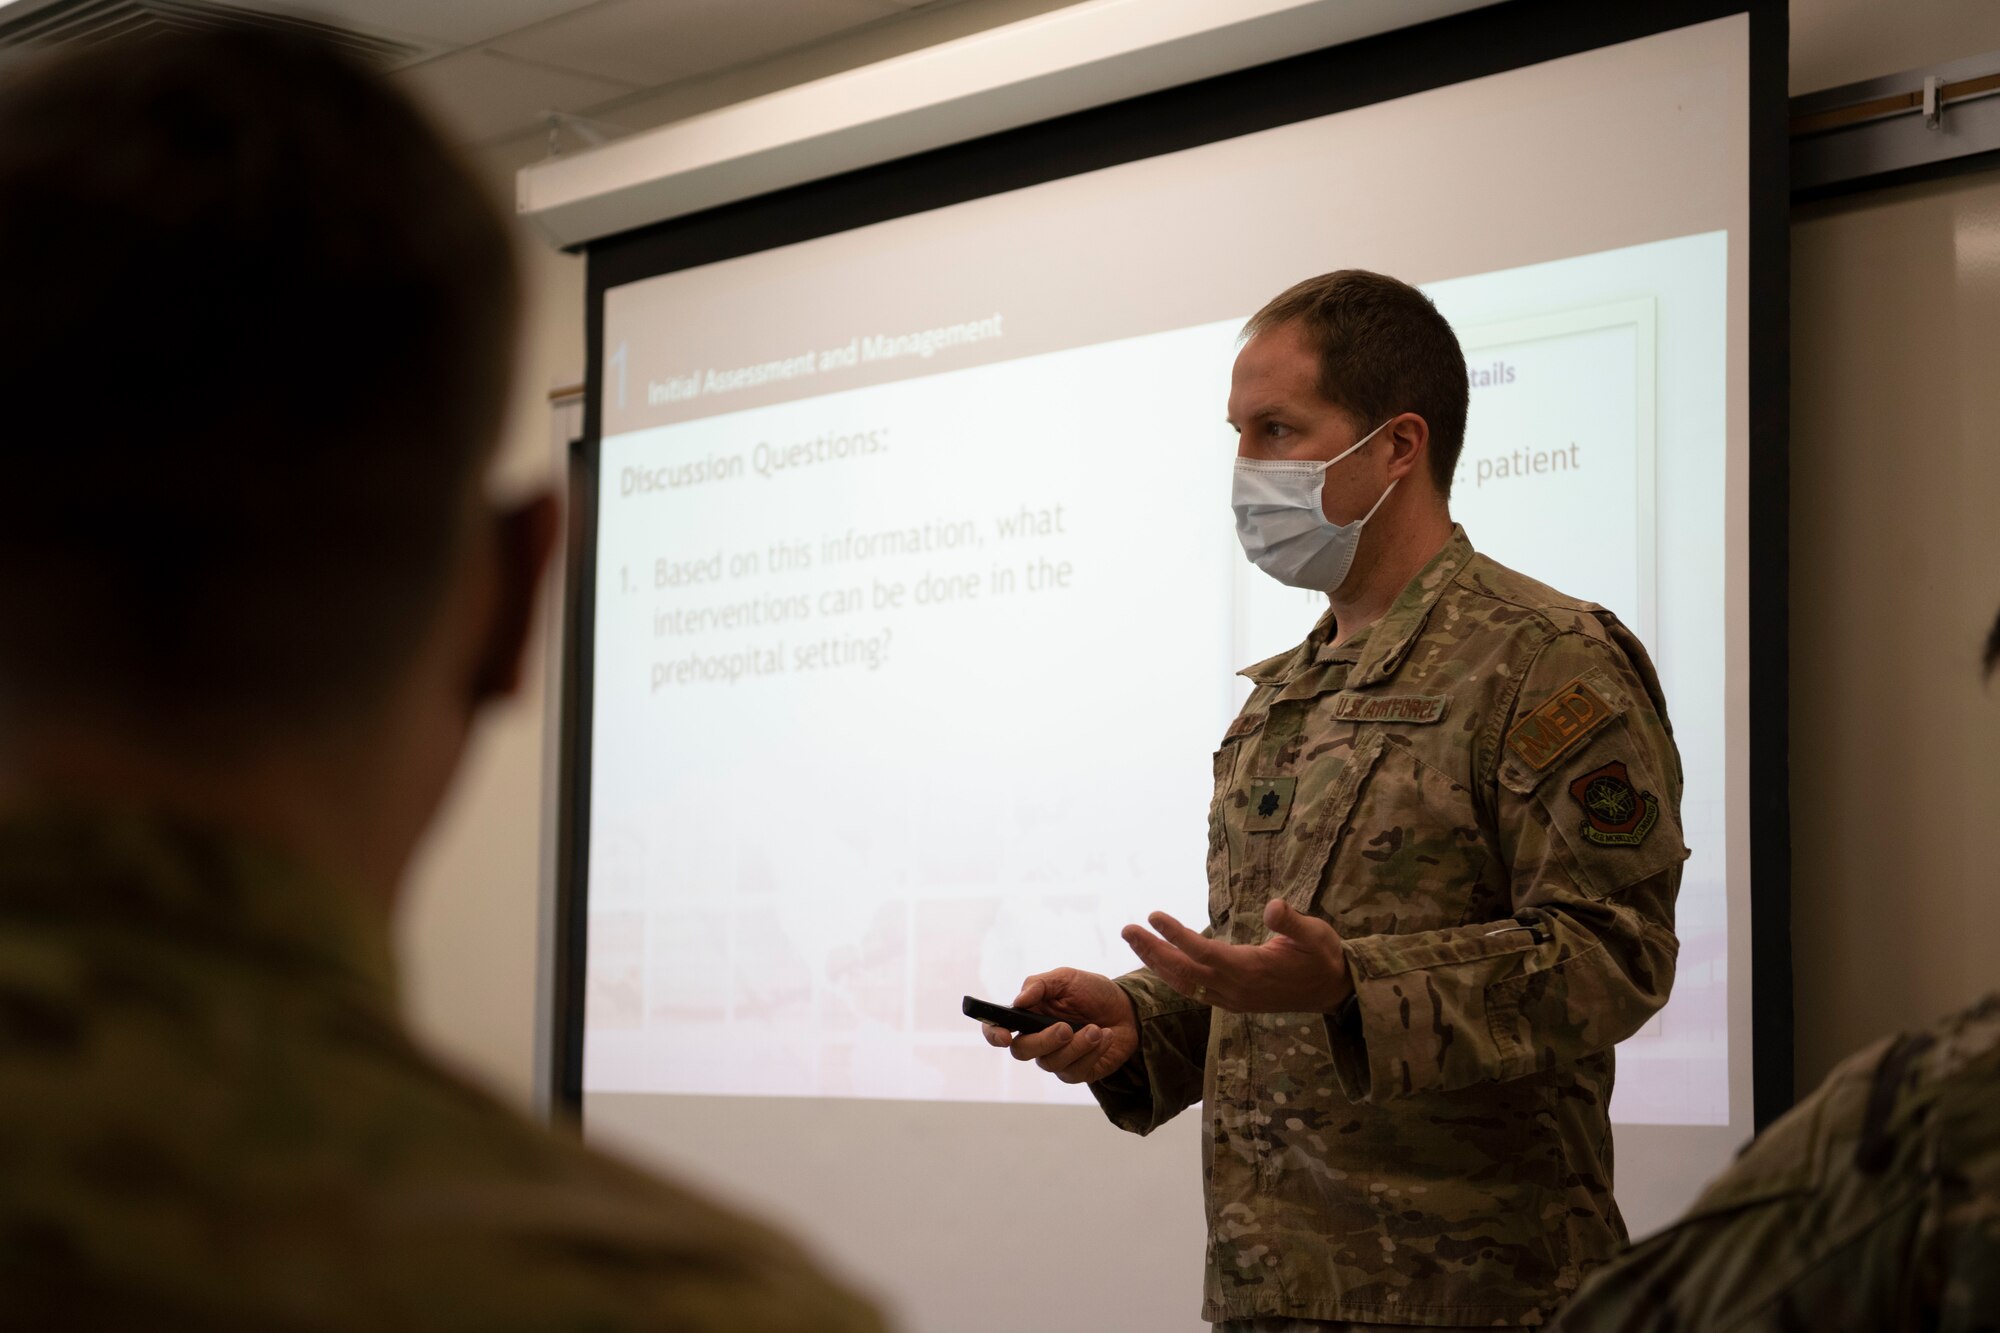 U.S. Air Force Lt. Col. Brent Feldt, 60th Surgical Operations Squadron, chief of head and neck surgery and course director of Advanced Trauma Life Support, leads a discussion March 3, 2021, Travis Air Force Base, California. Nine service members participated in an ATLS training course at David Grant USAF Medical Center. ATLS equips different specialties in the medical field with the skills to treat traumatic injuries. (U.S. Air Force photo by Airman 1st Class Alexander Merchak)